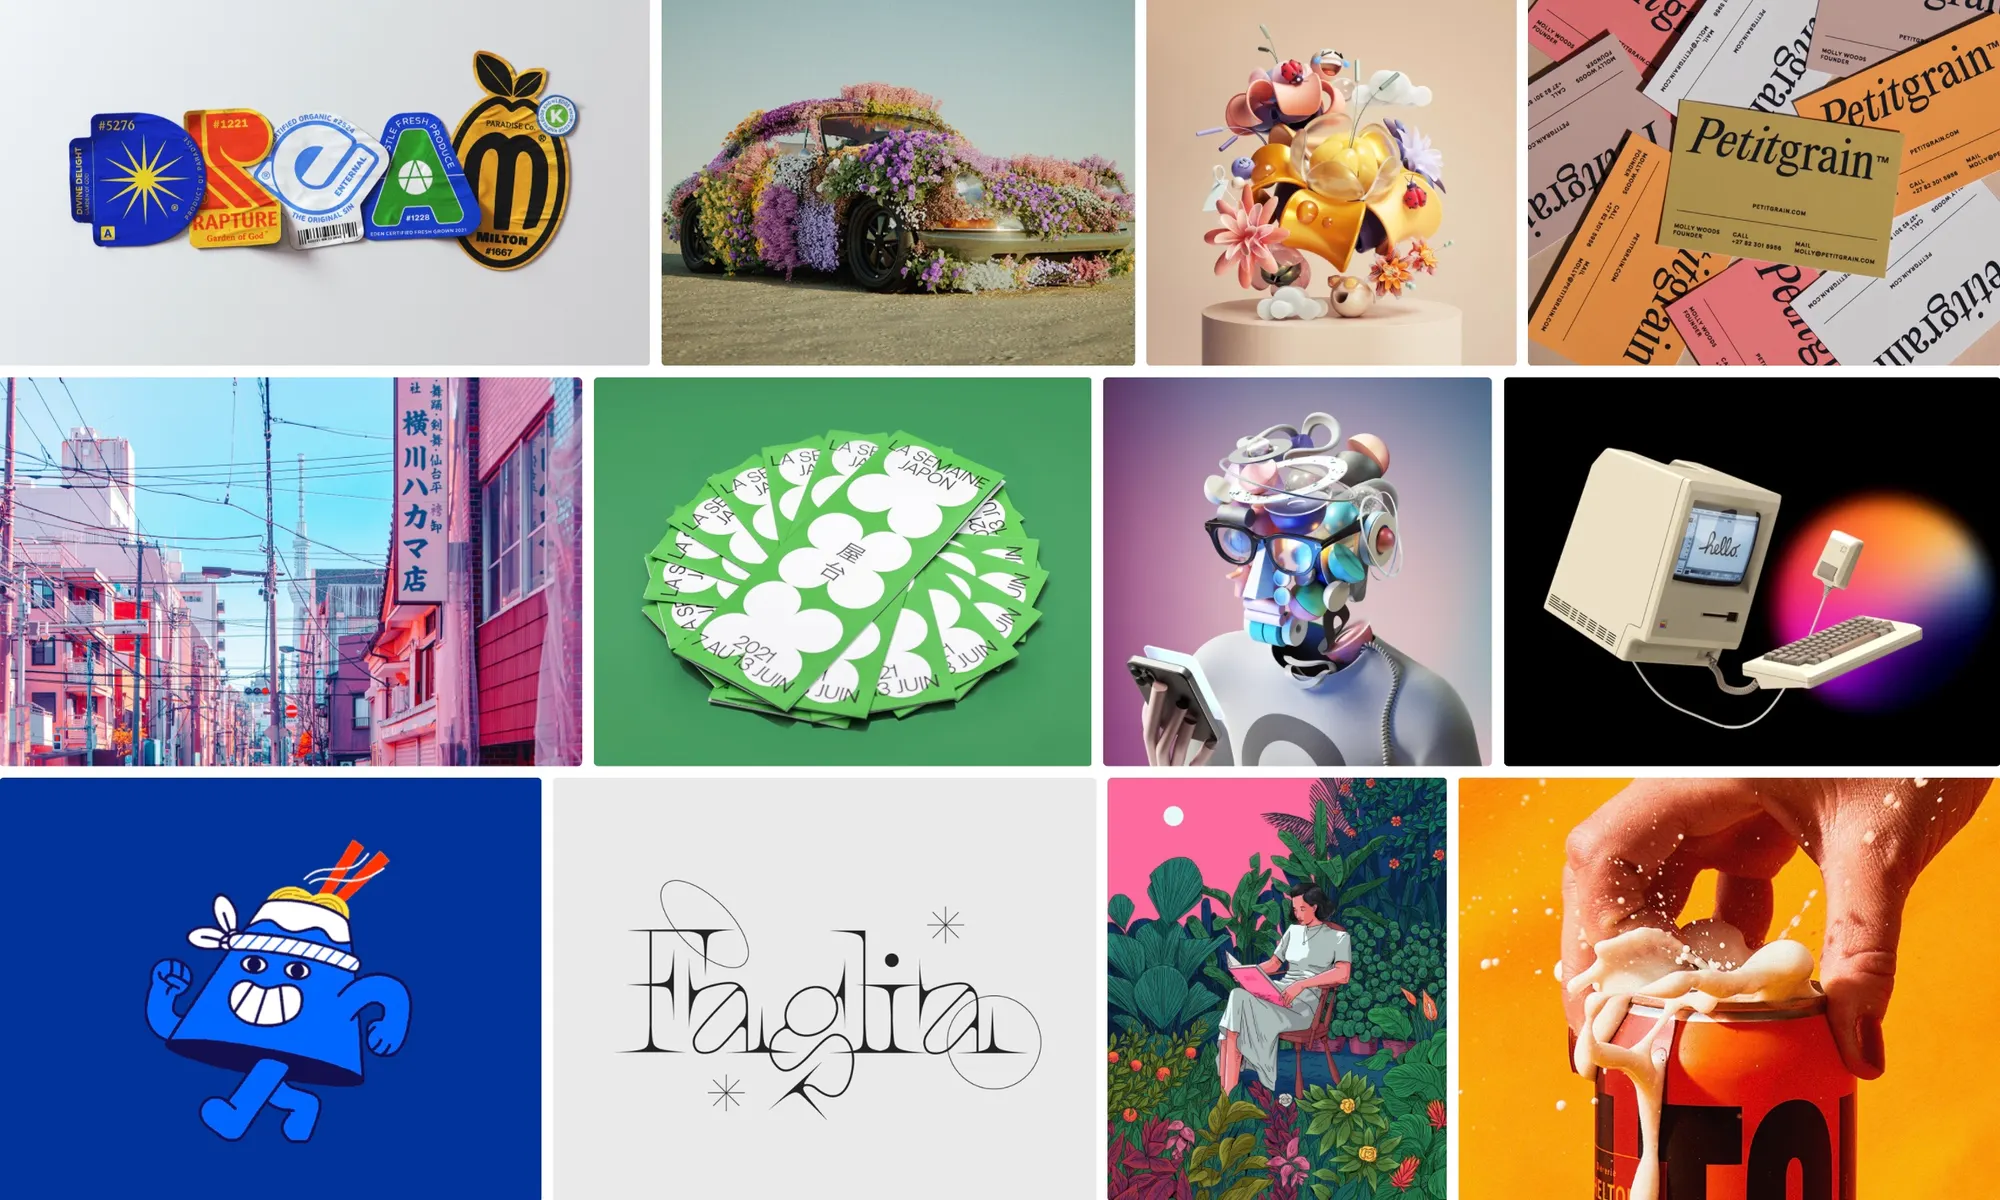 Moodboard from Behance projects this year. 